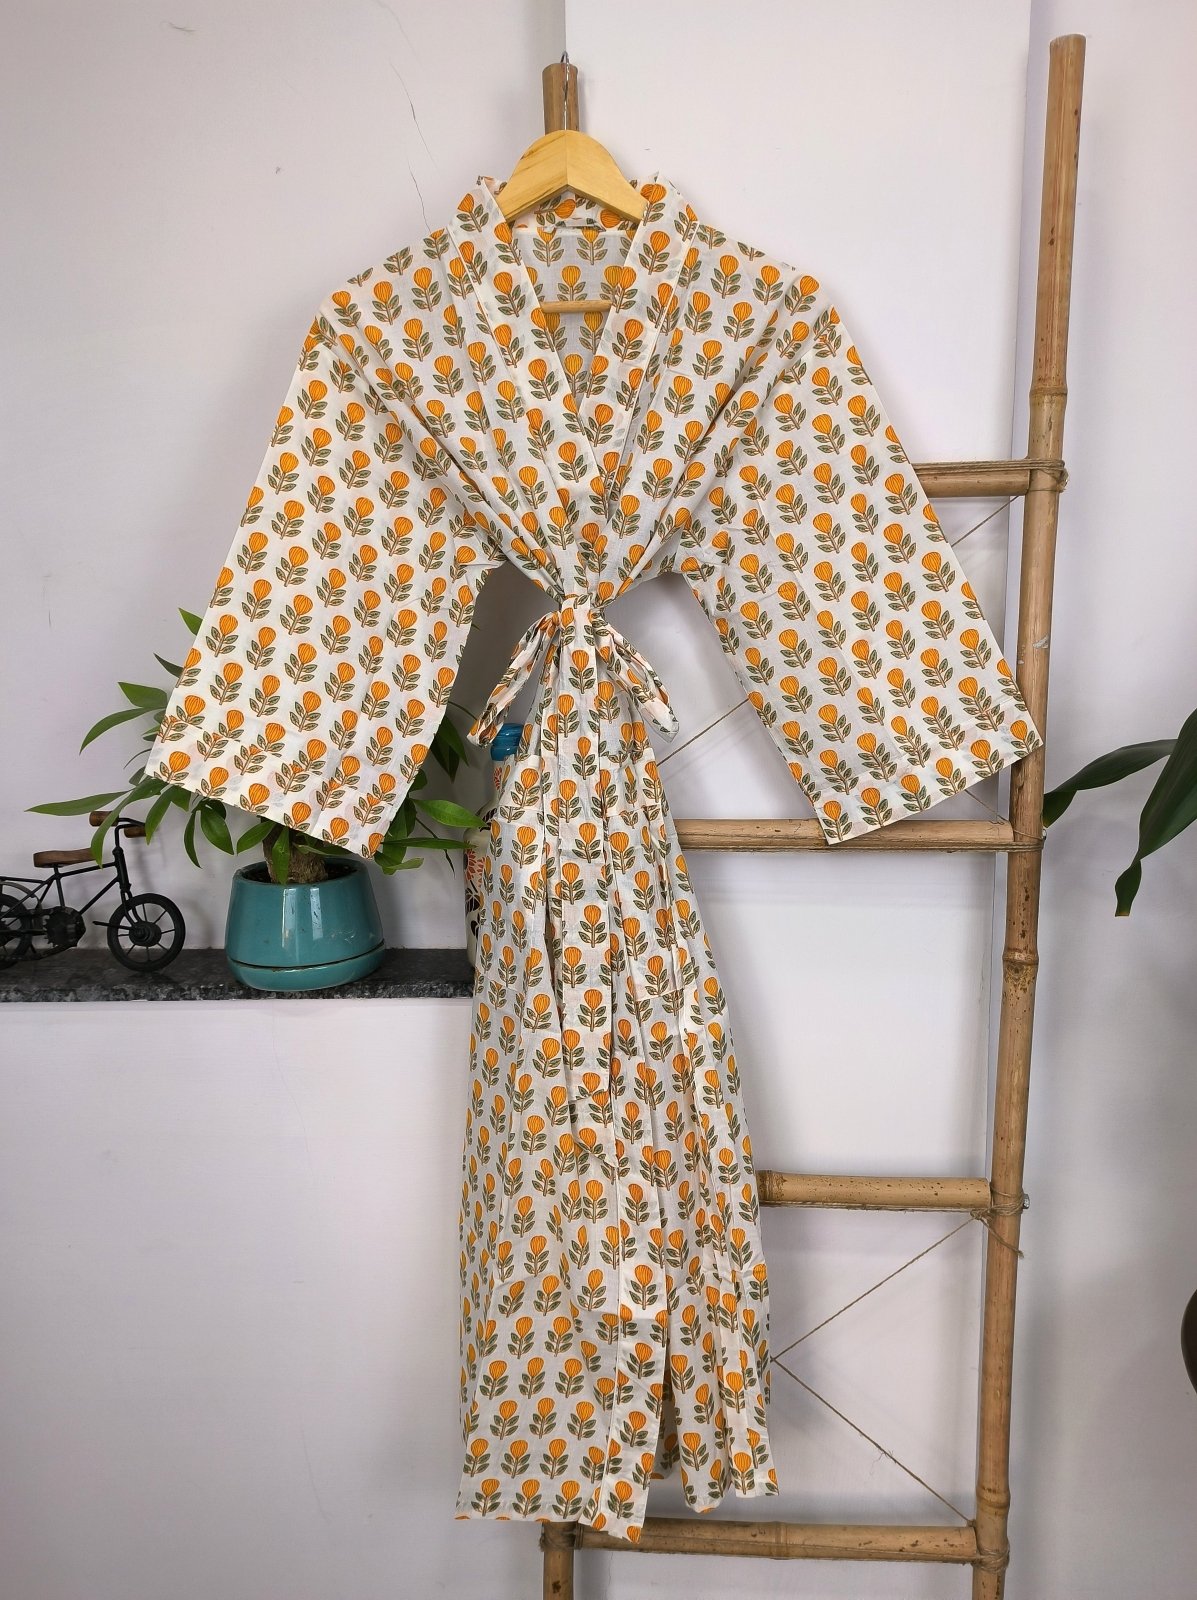 Pure Cotton Kimono Indian Handprinted Boho House Robe Summer Dress | Ivory White Yellow Flower Blossom Luxury Beach Holiday Yacht Cover Up - The Eastern Loom